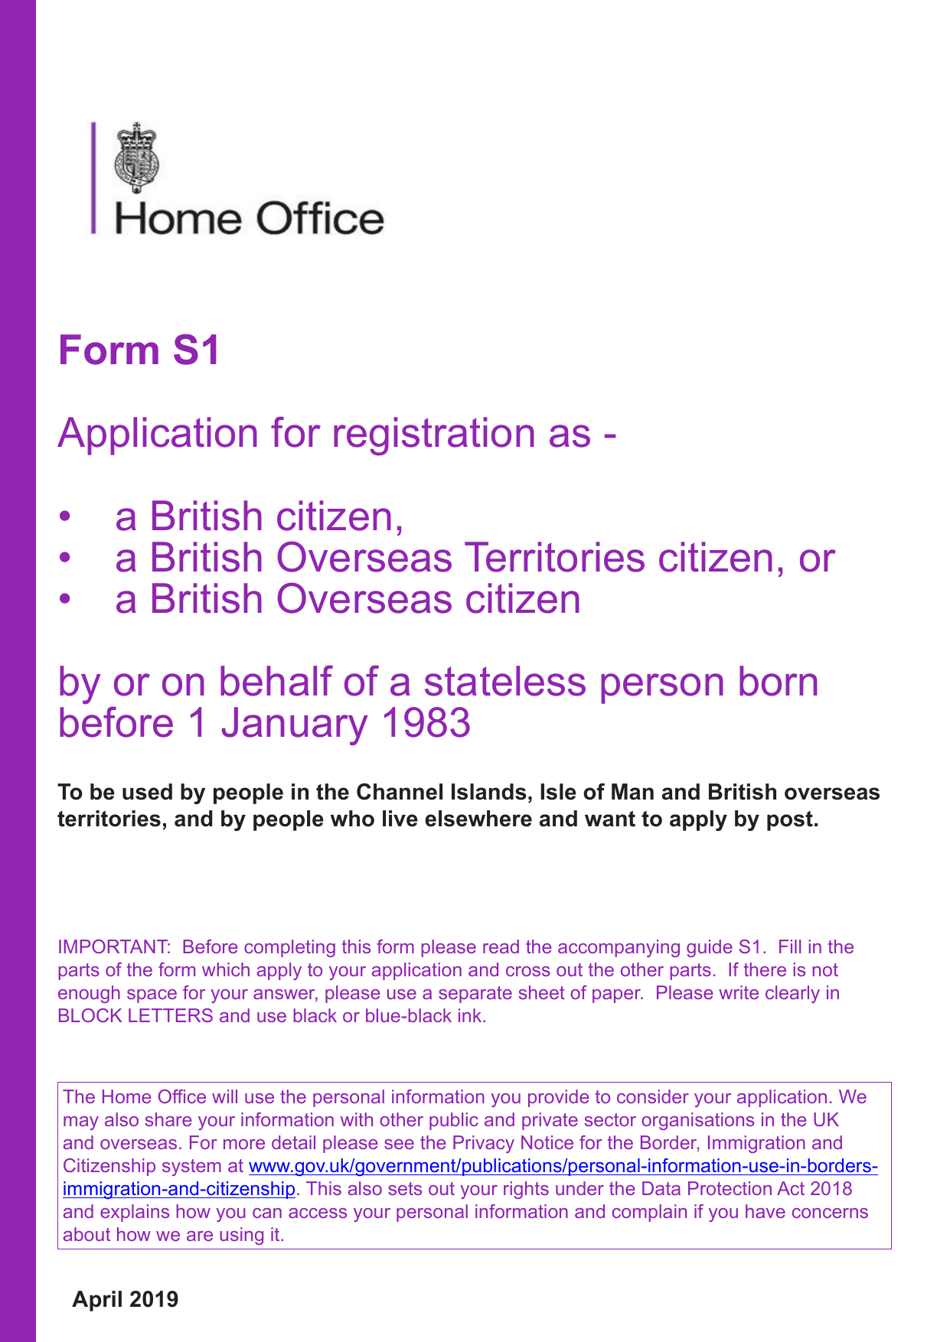 Form S1 Application for Registration as a British Citizen, a British Overseas Territories Citizen, or a British Overseas Citizen - United Kingdom, Page 1